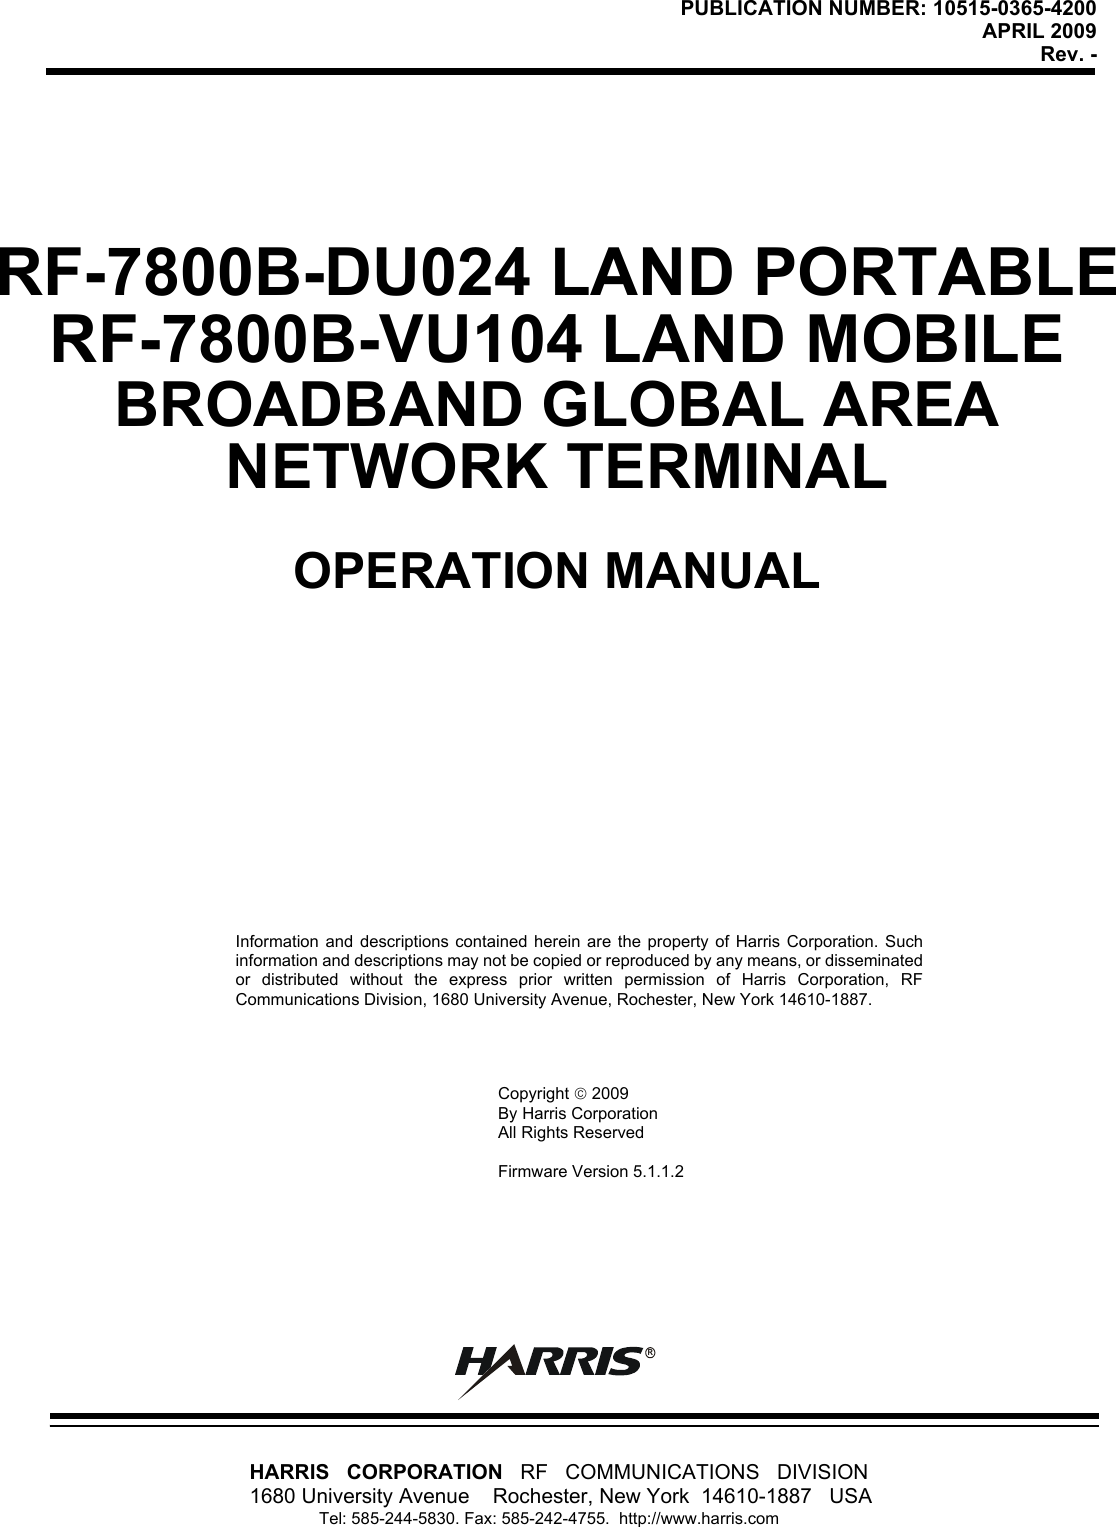 PUBLICATION NUMBER: 10515-0365-4200APRIL 2009Rev. -HARRIS   CORPORATION   RF   COMMUNICATIONS   DIVISION1680 University Avenue    Rochester, New York  14610-1887   USA               Tel: 585-244-5830. Fax: 585-242-4755.  http://www.harris.comRInformation and descriptions contained herein are the property of Harris Corporation. Suchinformation and descriptions may not be copied or reproduced by any means, or disseminatedor distributed without the express prior written permission of Harris Corporation, RFCommunications Division, 1680 University Avenue, Rochester, New York 14610-1887.Copyright  2009By Harris CorporationAll Rights ReservedFirmware Version 5.1.1.2RF-7800B-DU024 LAND PORTABLERF-7800B-VU104 LAND MOBILEBROADBAND GLOBAL AREANETWORK TERMINALOPERATION MANUAL